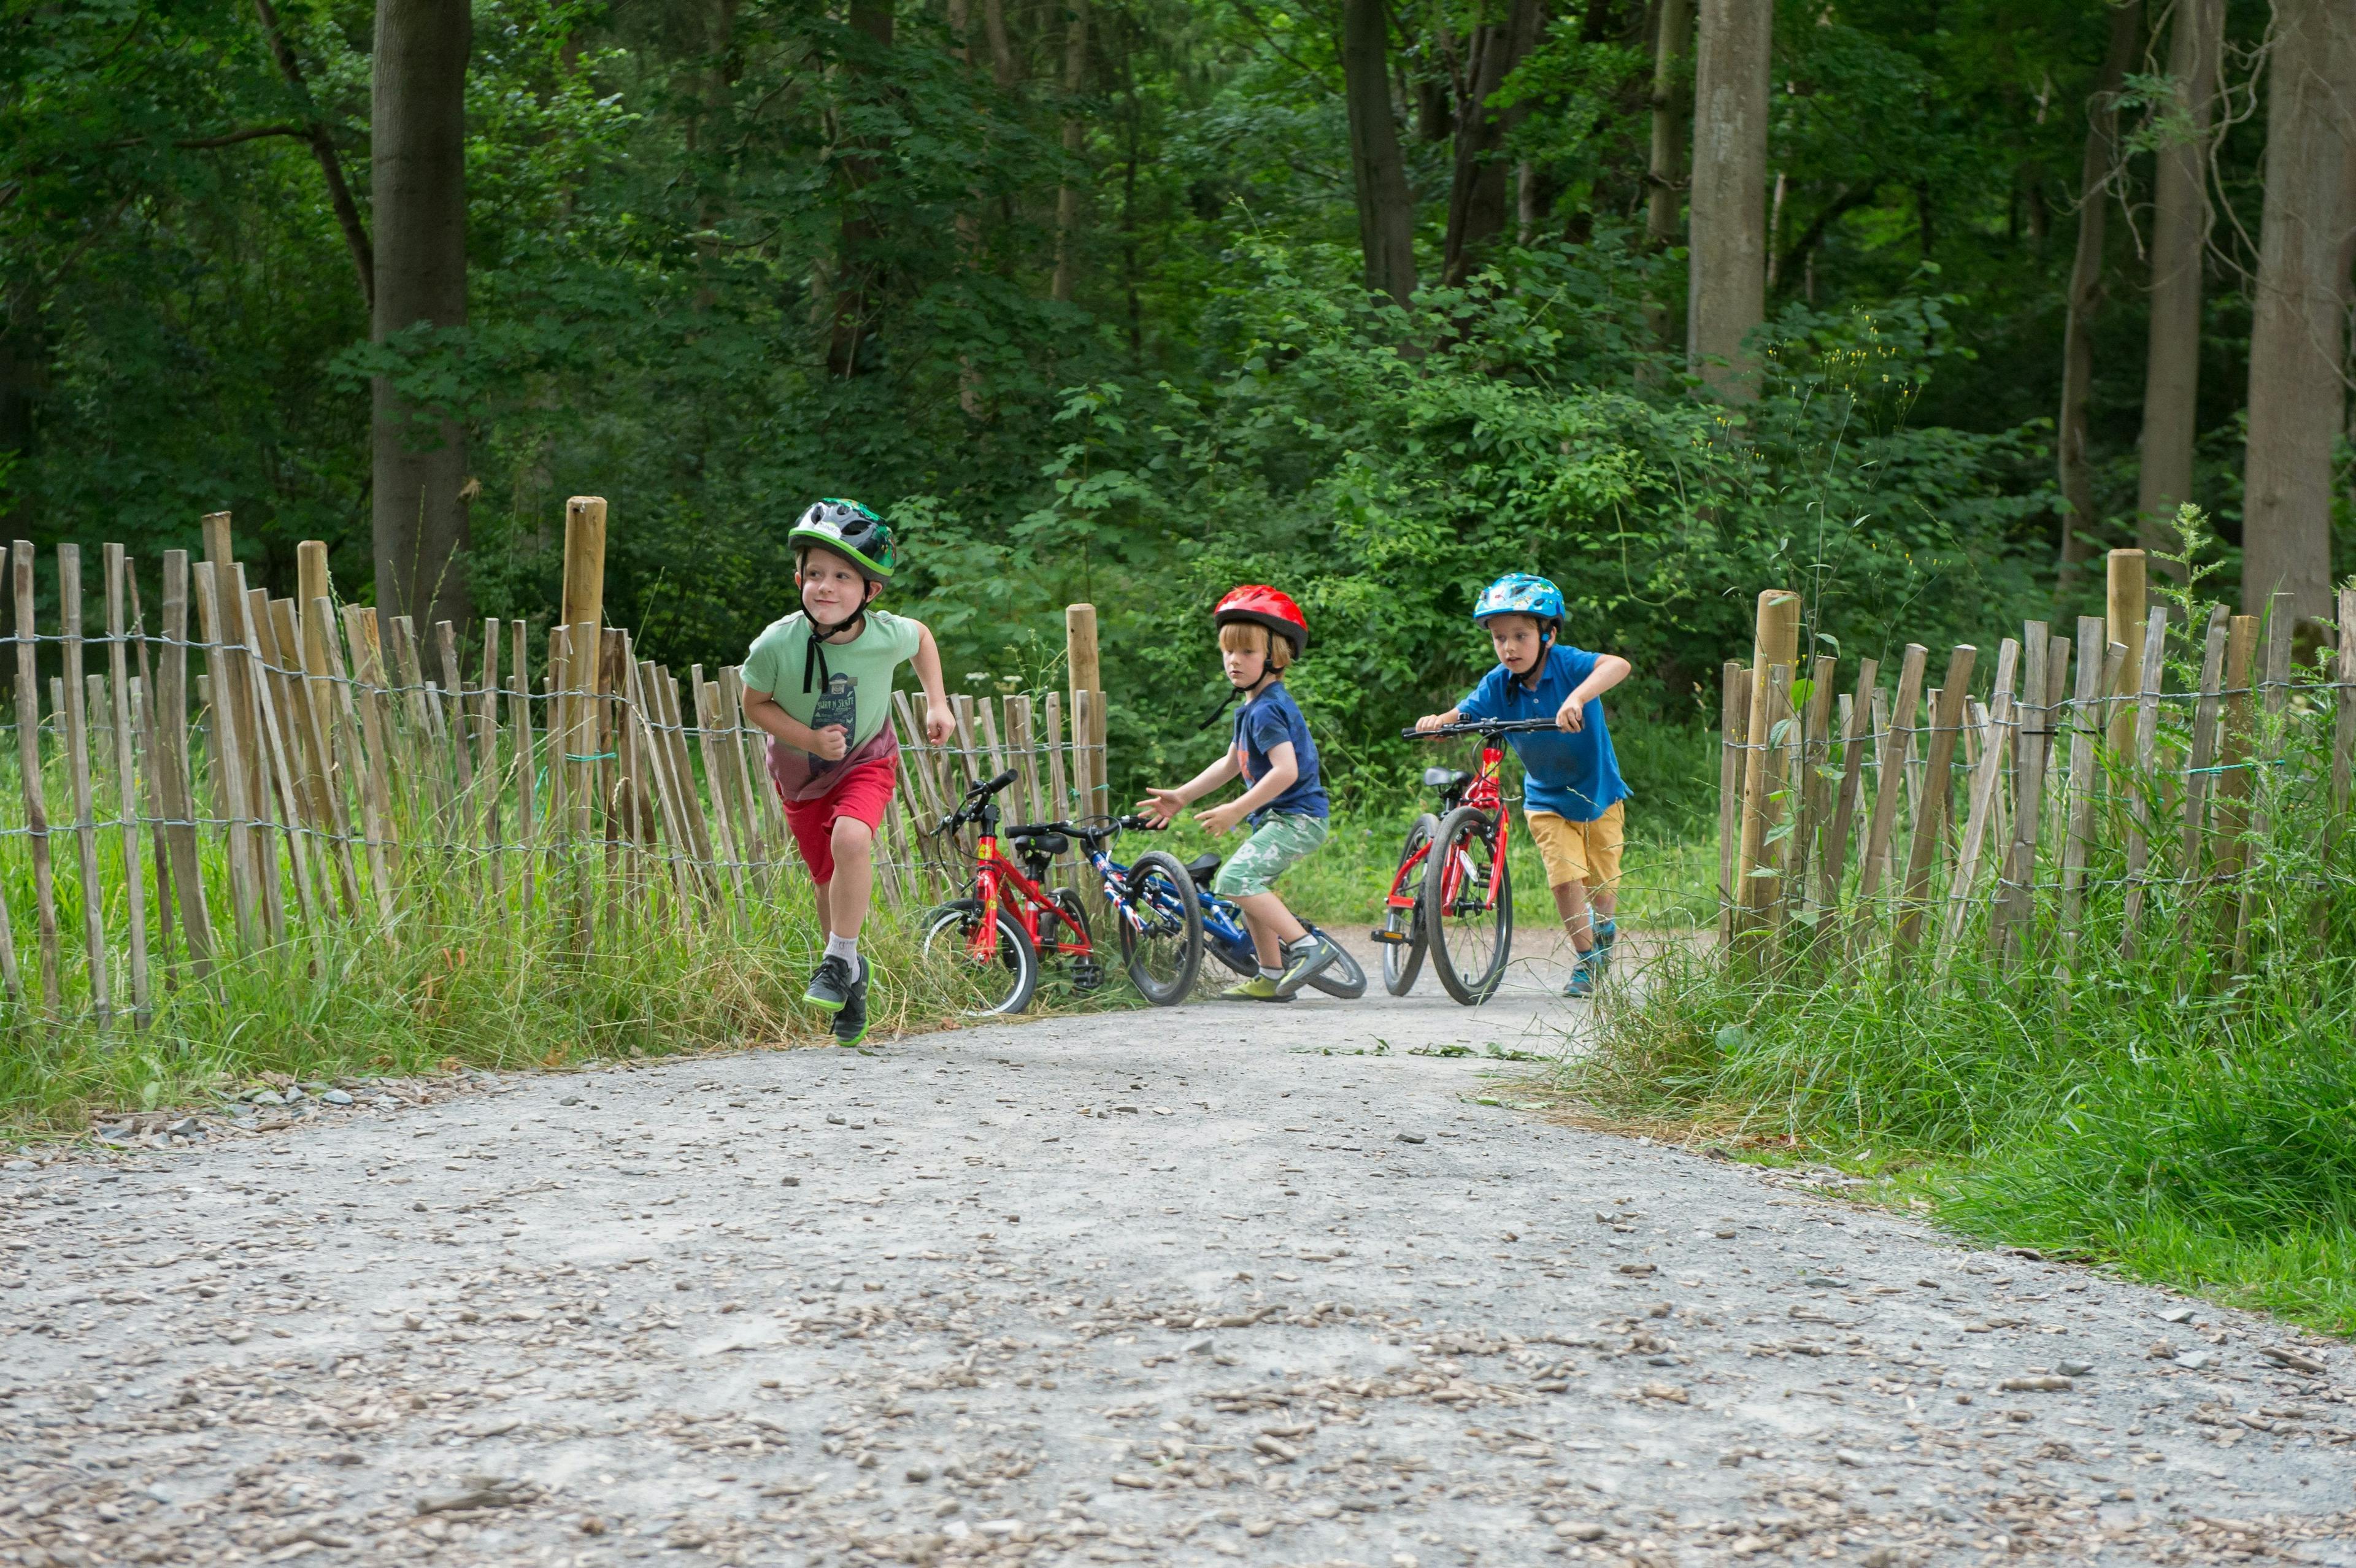 Three children playing on bicycles near a forest